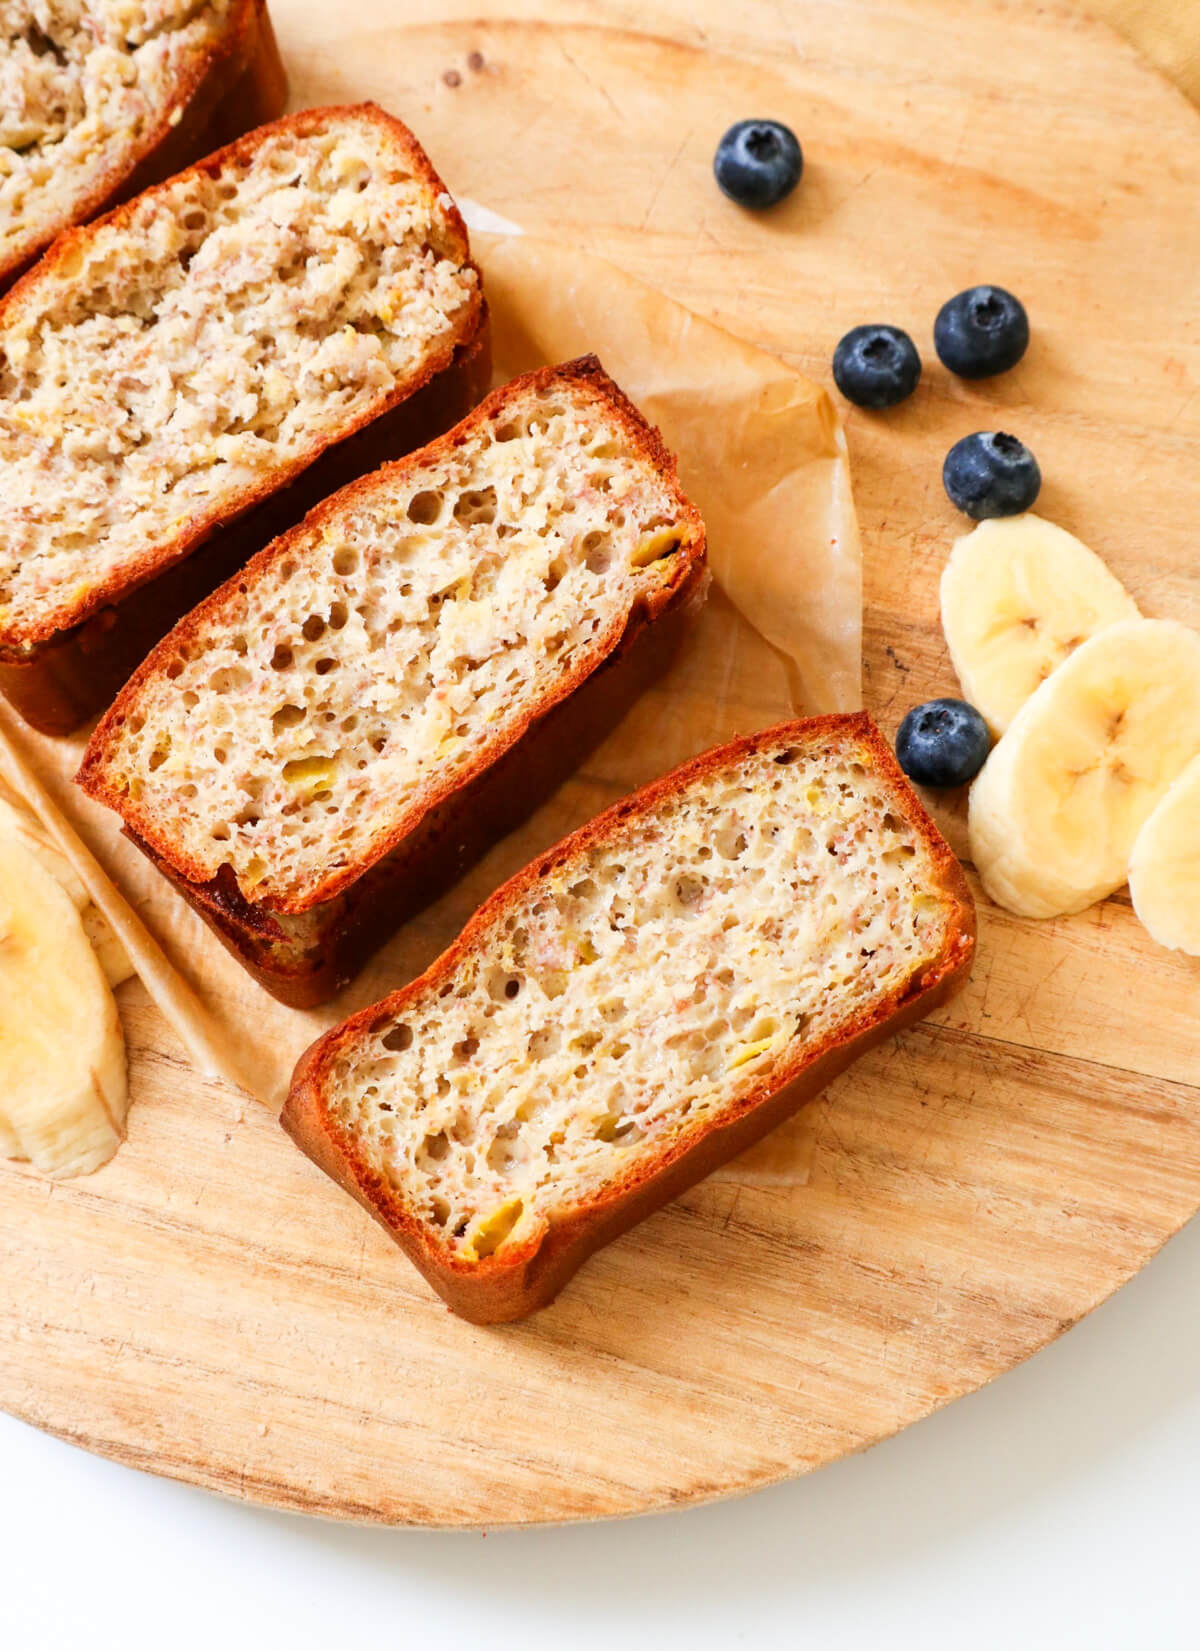 diagonal dairy free banana bread slices on a wooden board with blueberries and banana slices on the side.